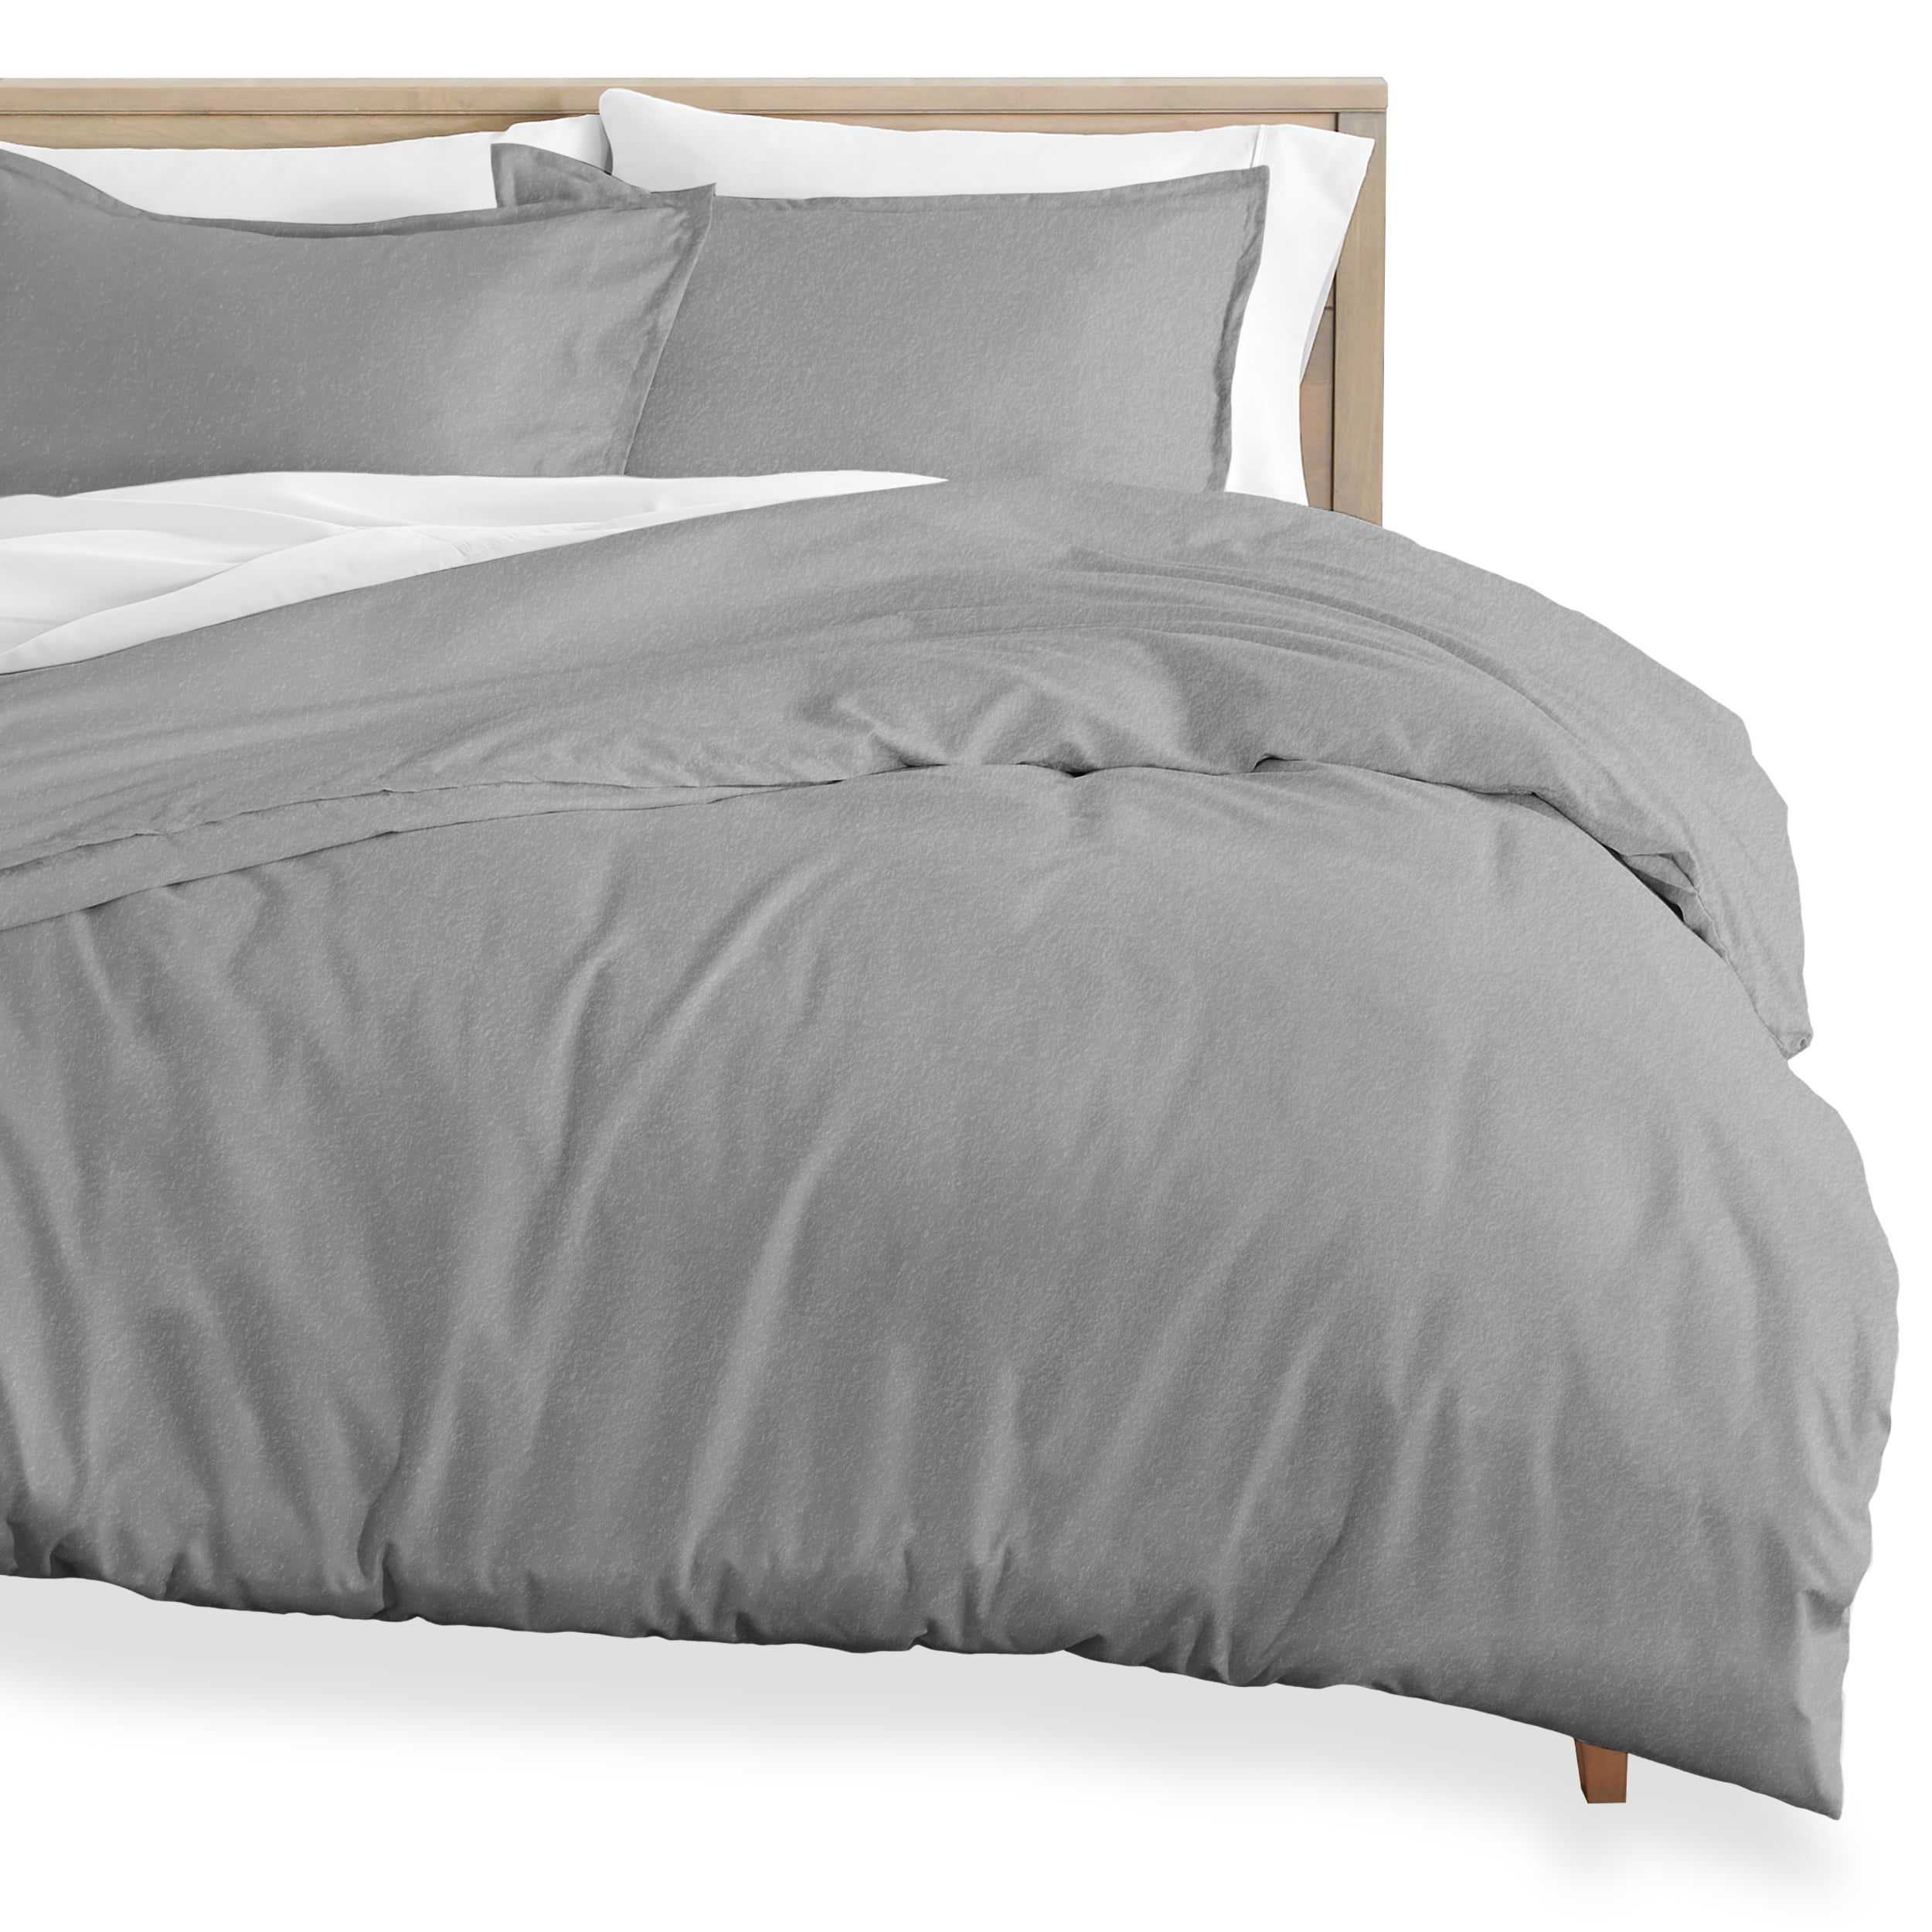 Bare Home Flannel Duvet Cover And Sham, Twin Flannel Duvet Cover Set